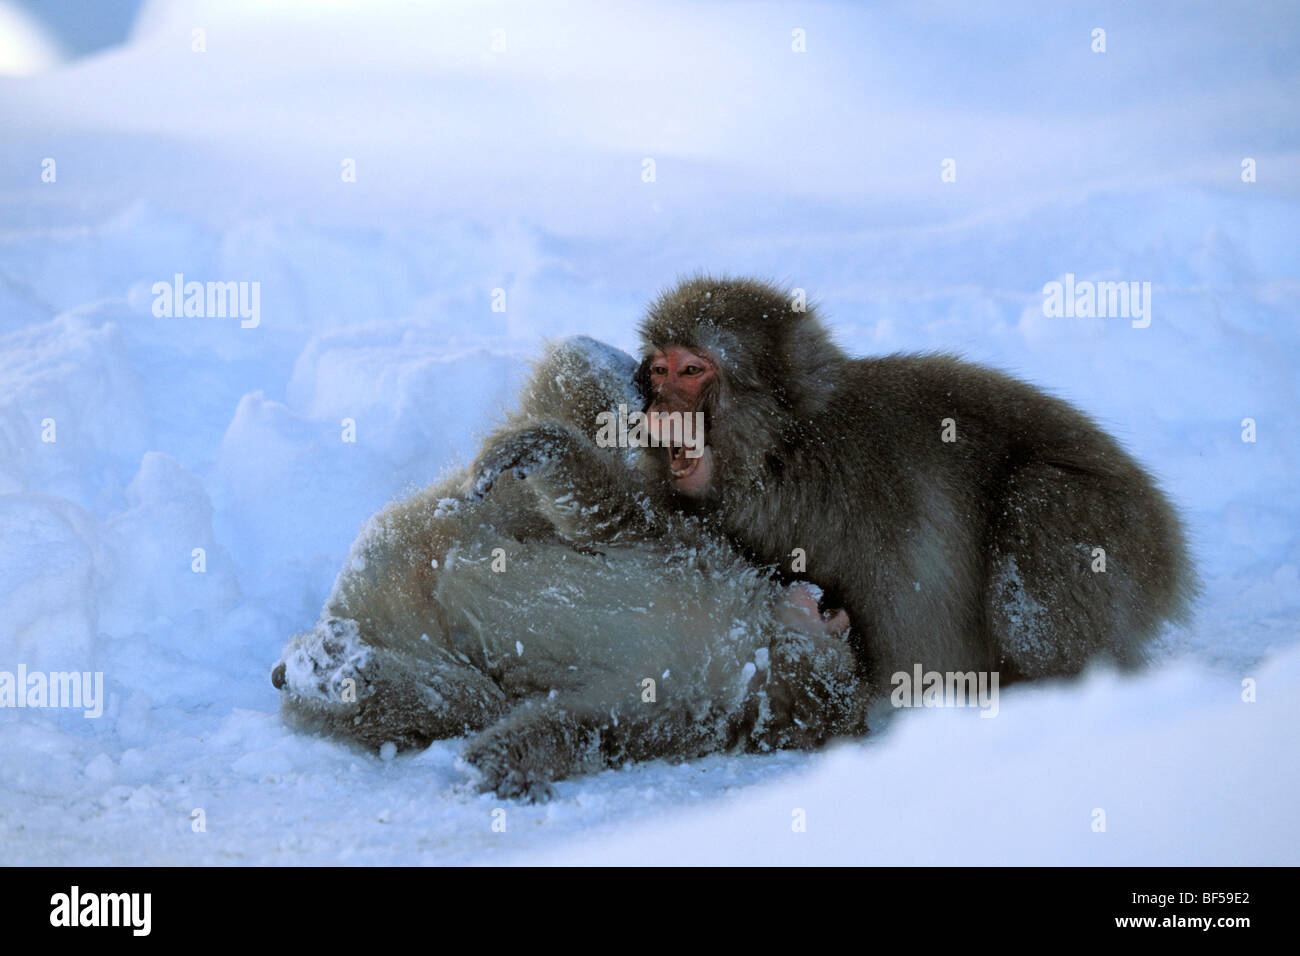 Young Snow Monkeys, Japanese Macaques (Macaca fuscata) playing in snow, snowfall, Japanese Alps, Japan, Asia Stock Photo